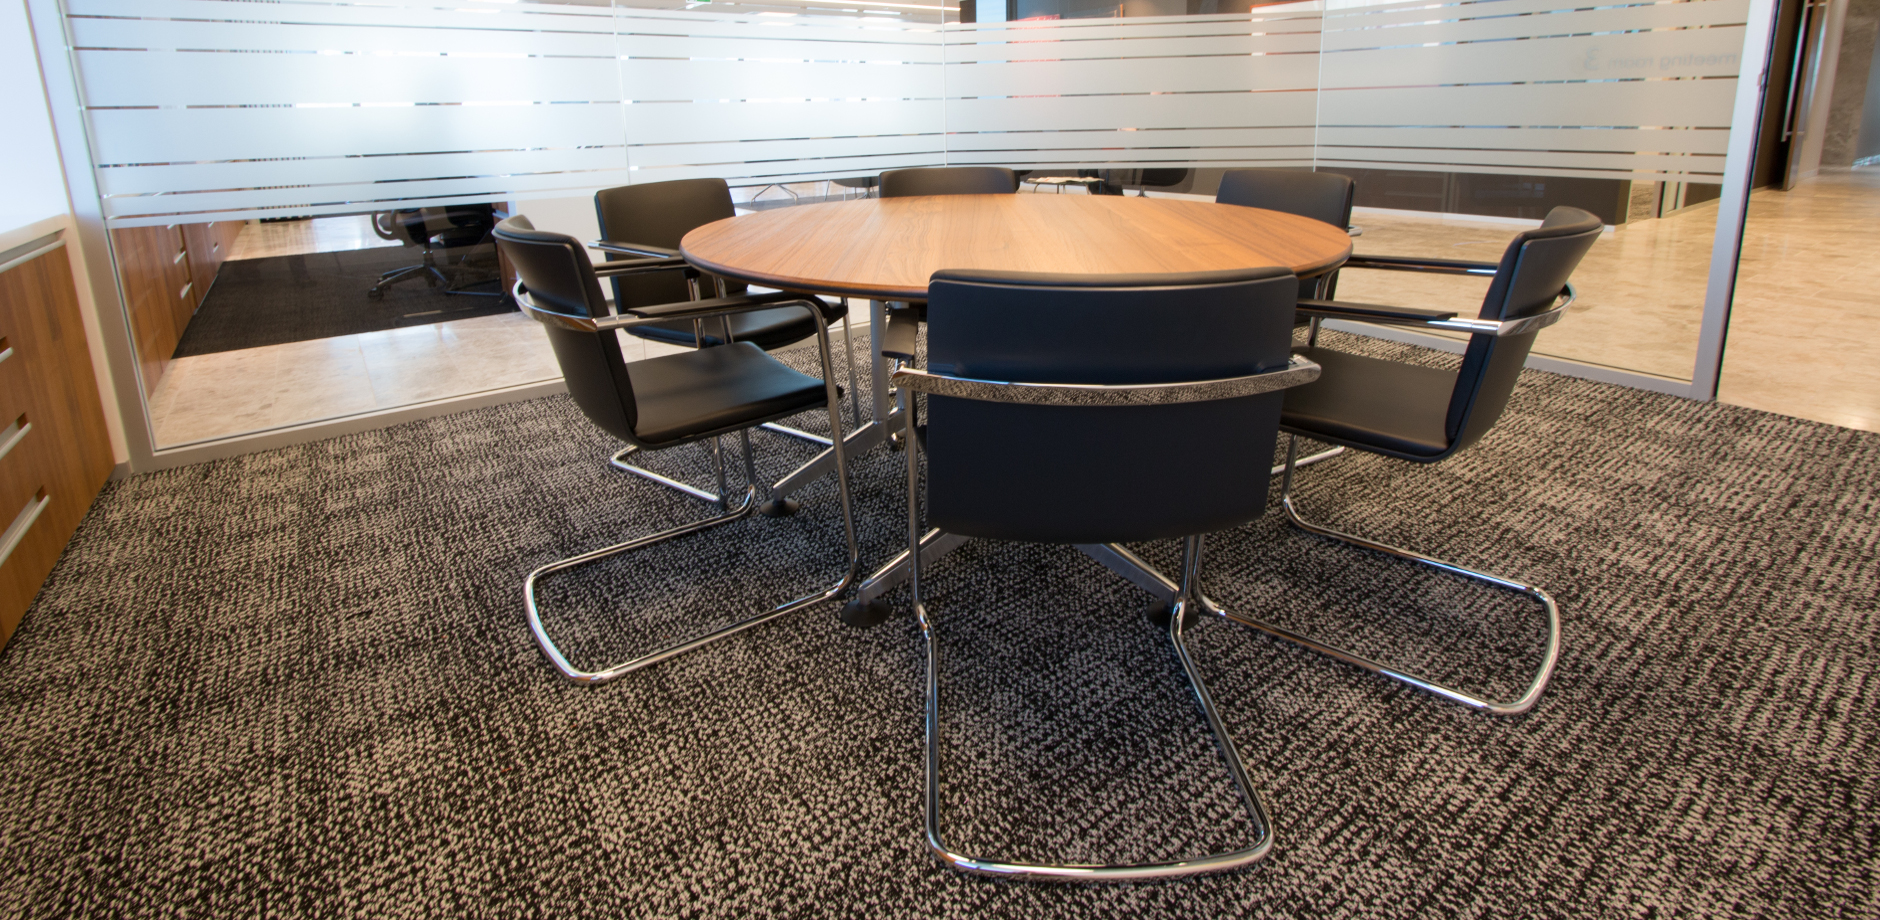 Conference Room - Office Furniture